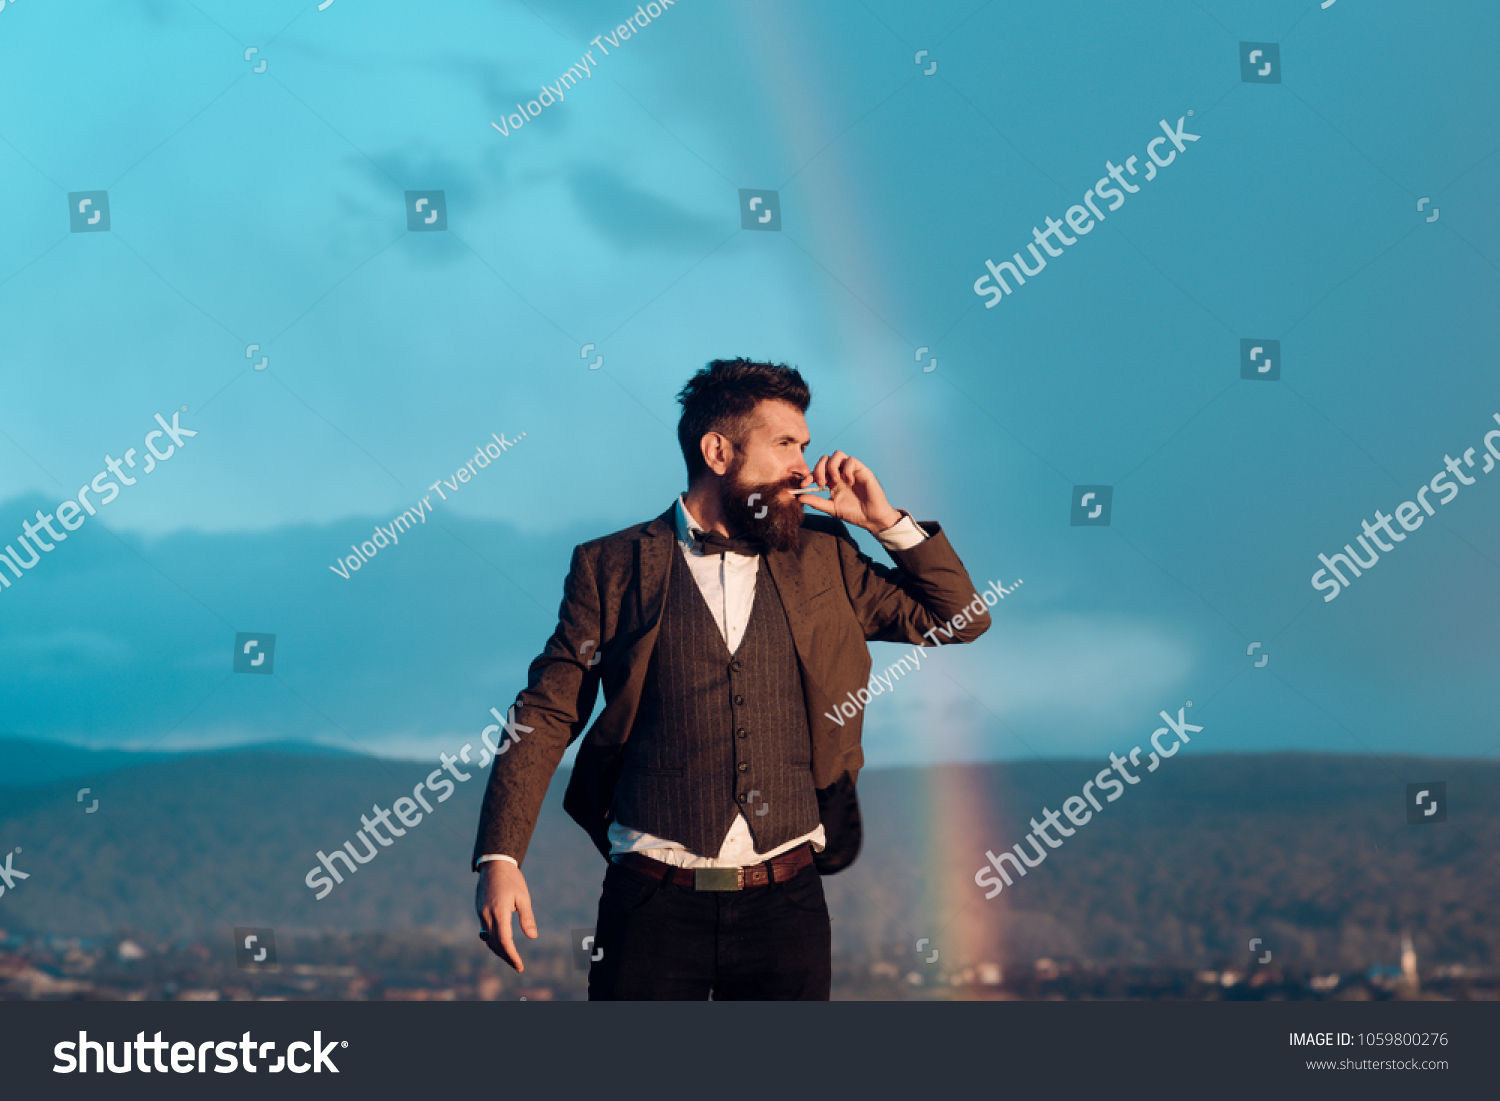 Hipster with stylish appearance smoking in front of sky with rainbow. Lord of world concept. Successful man with scenery on background. Guy with strict face in suit feels free and successful. #1059800276